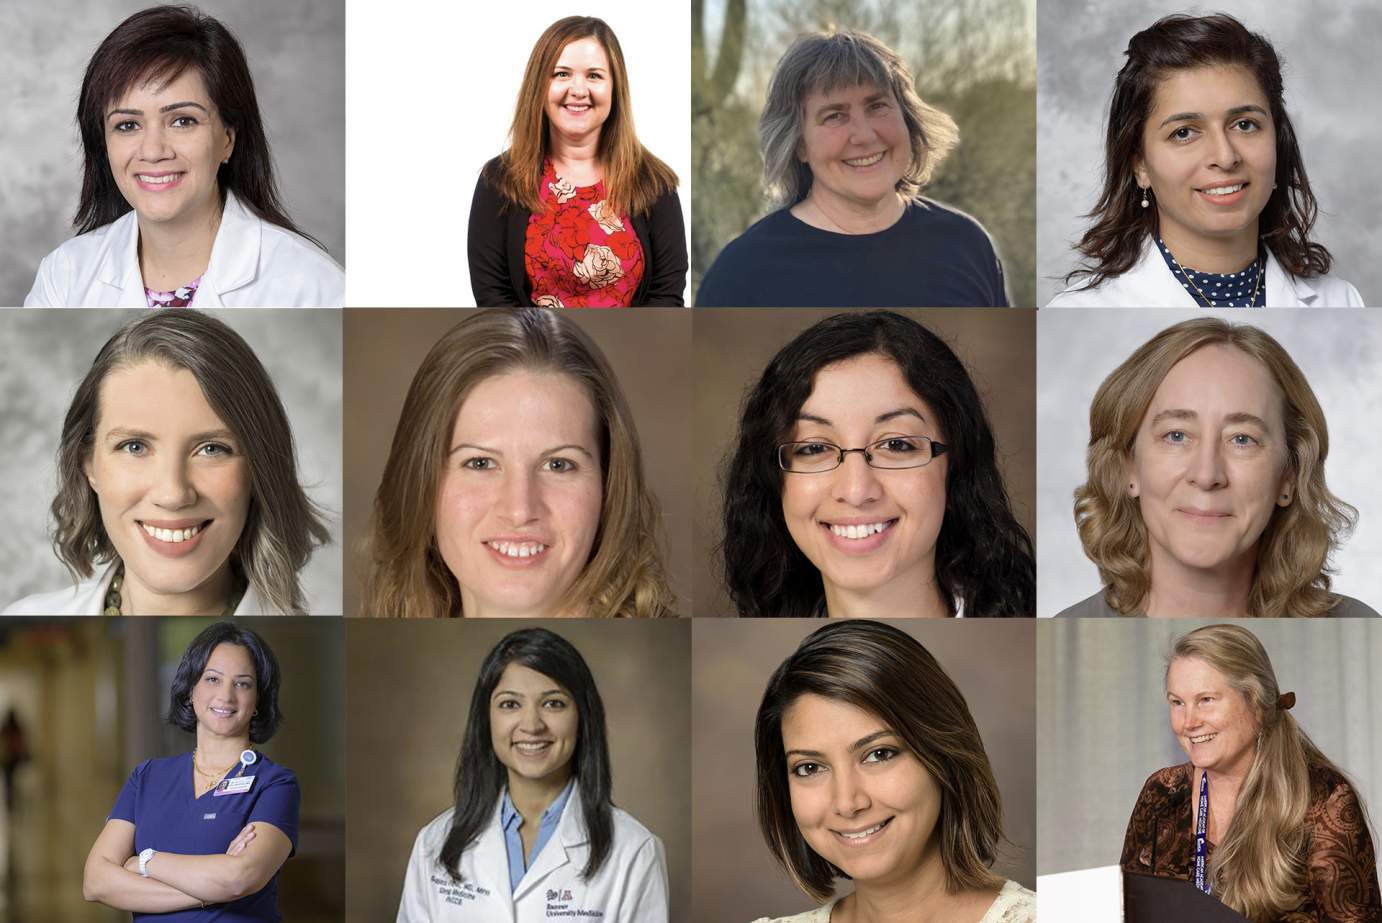 [Faces of 11 female faculty from the University of Arizona who won 2023 WIMS Torchbearer Awards for Women in Medicine Month, and Salma Patel, MD, one of the WAM/WIMS Steering Committee members who is from the department]